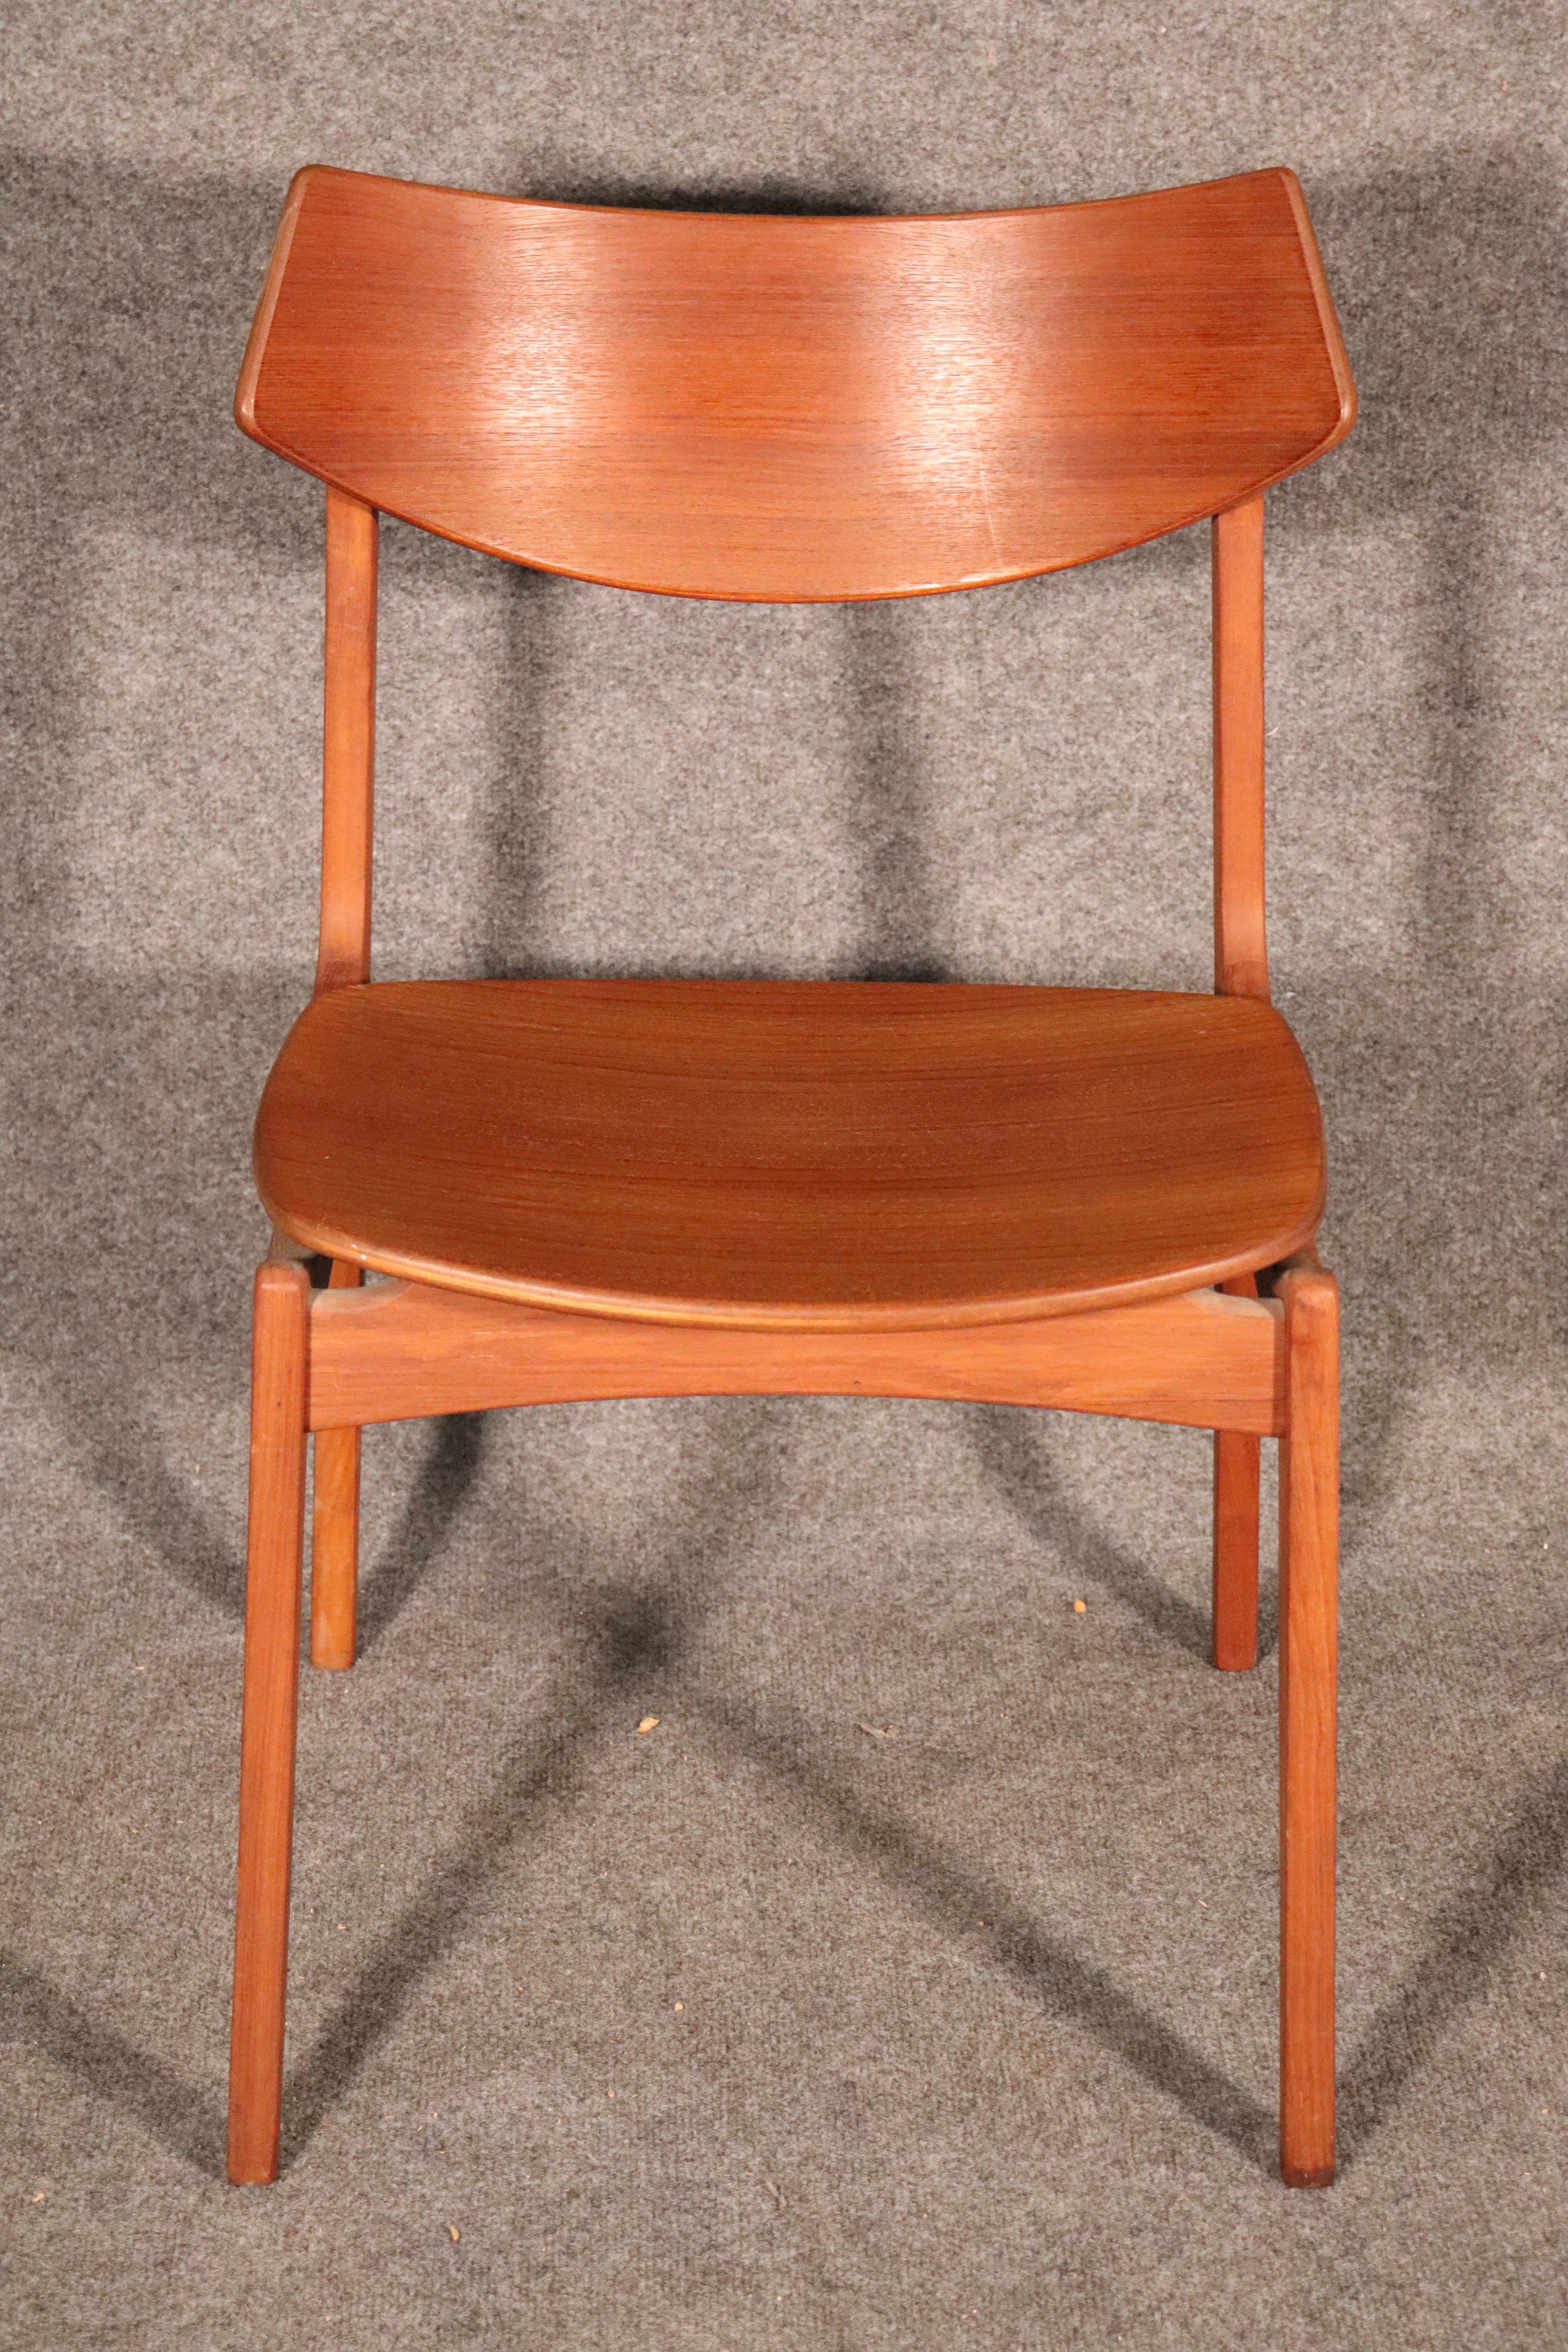 Single Danish chair with swooping back and floating seat. Great mid-century design for home or office use.
Please confirm location.